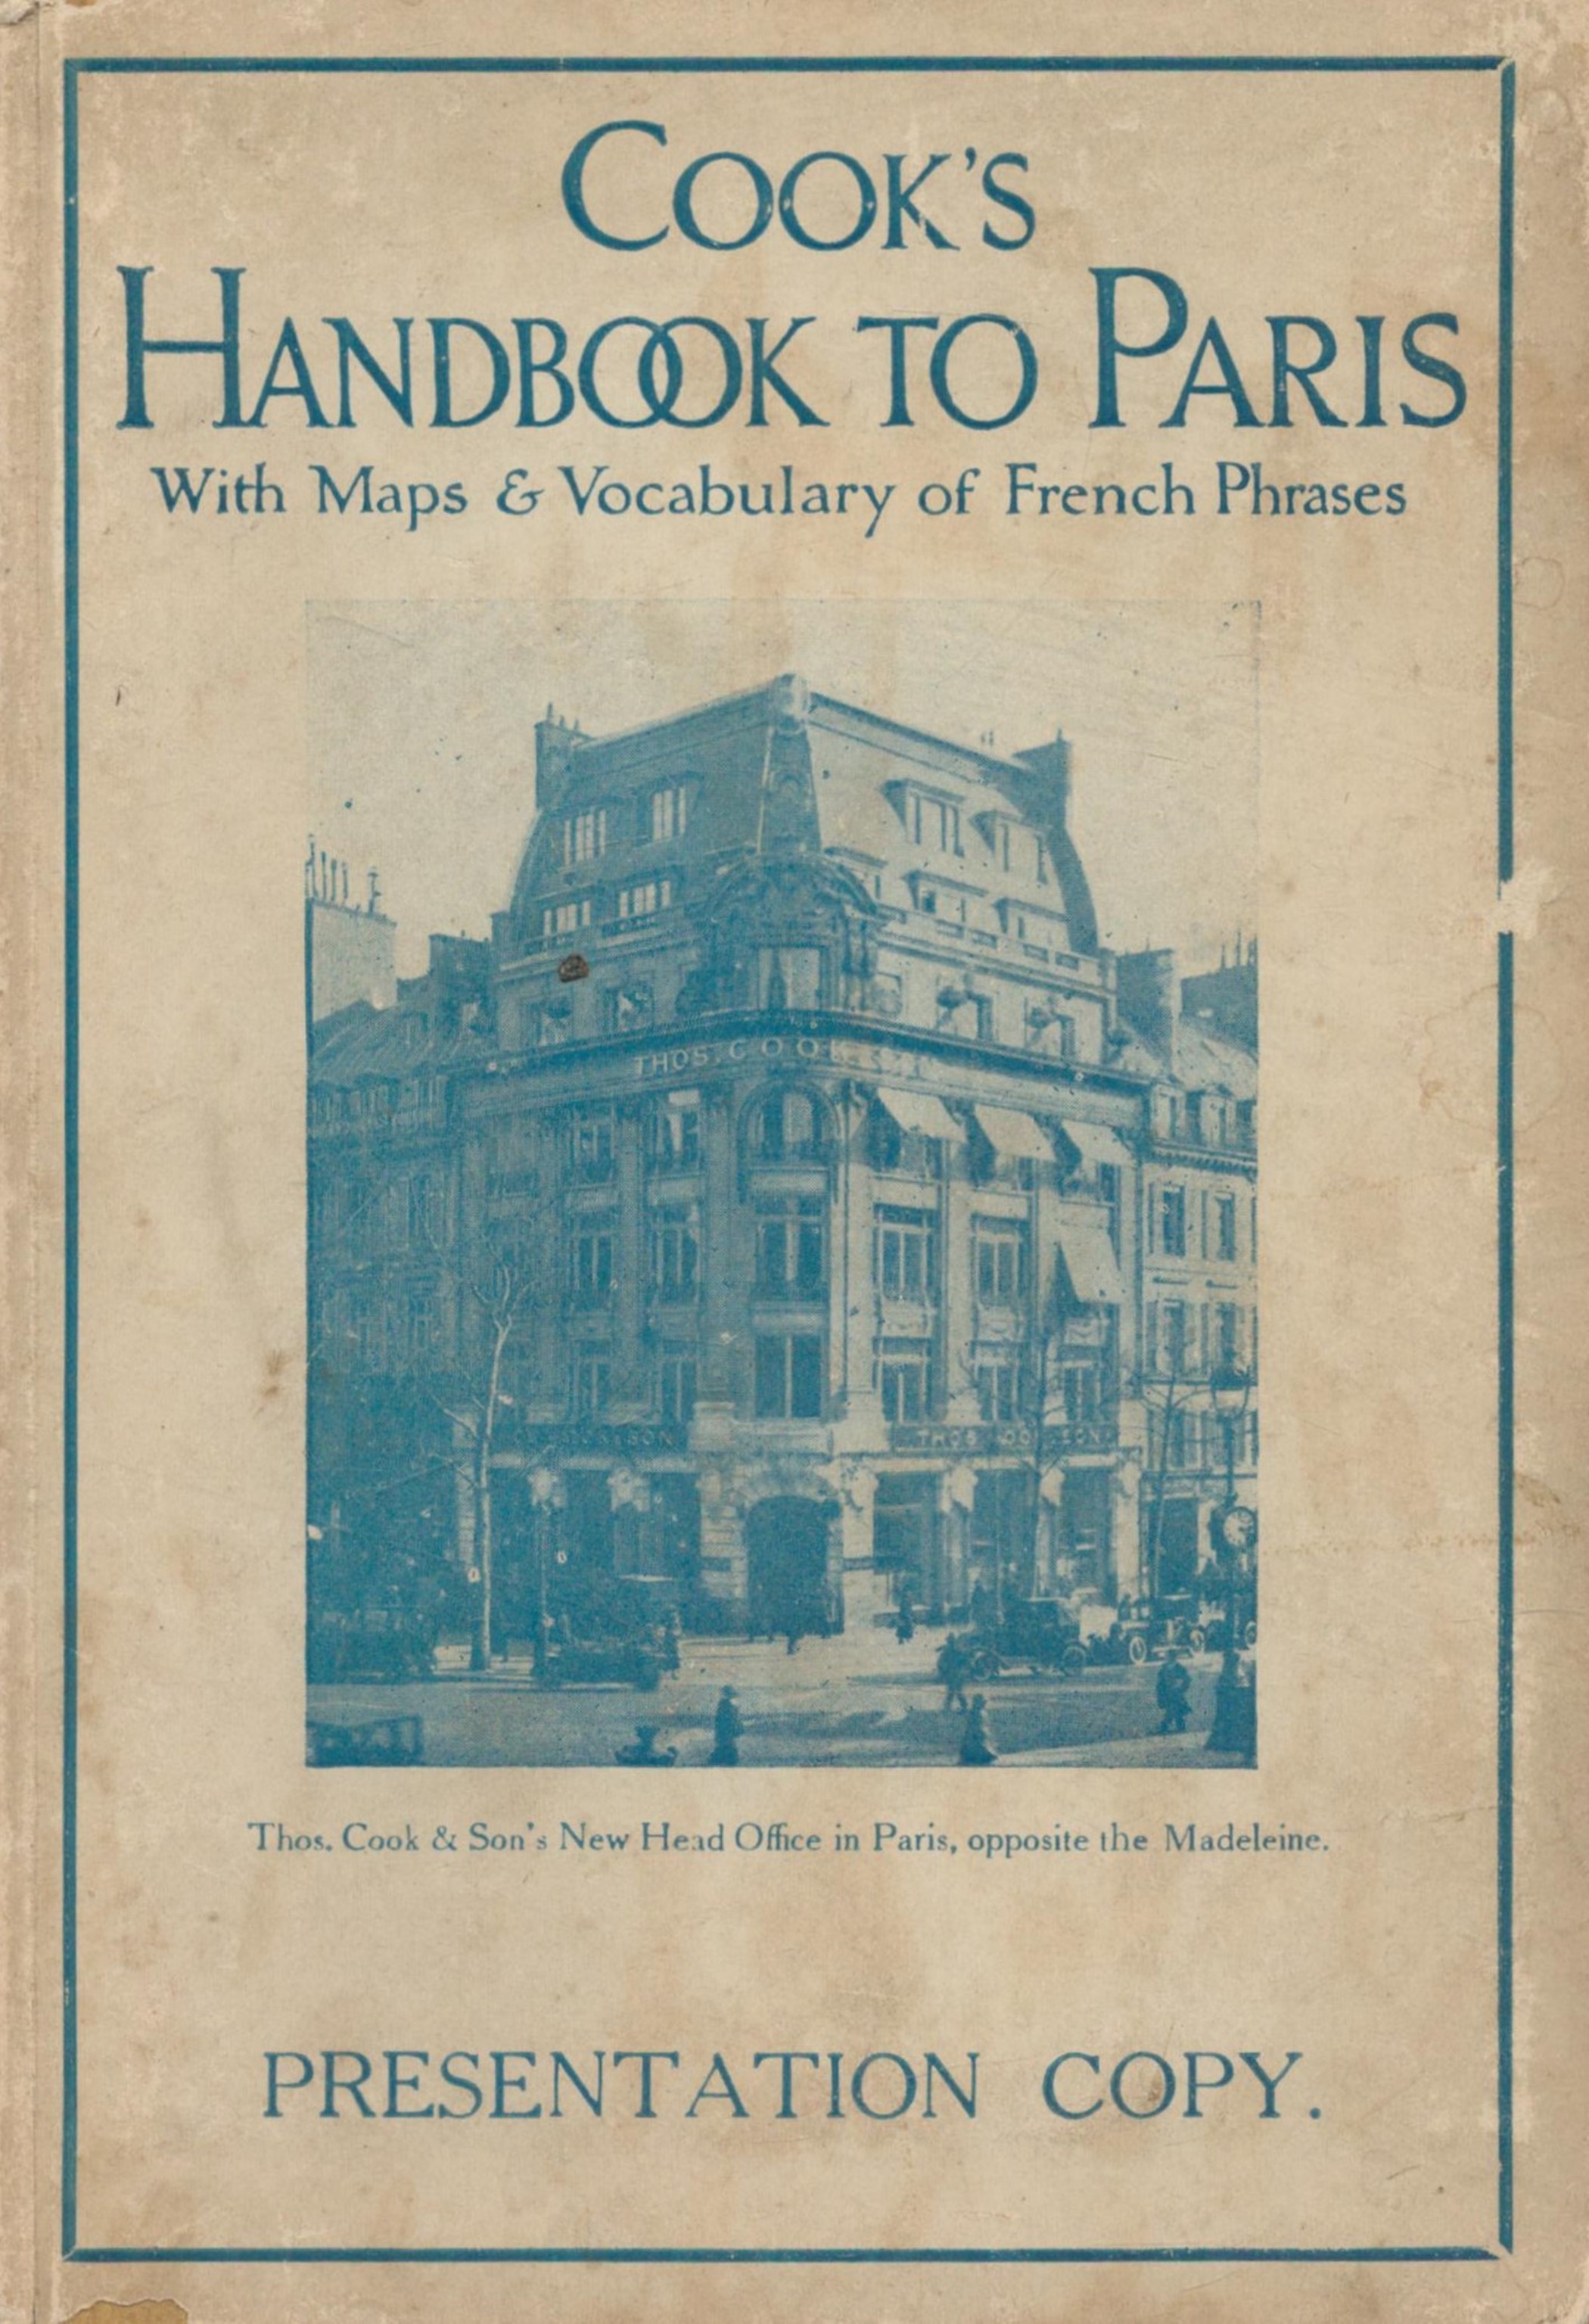 Cook's Handbook to Paris. With maps, vocabulary of French phrases. Presentation copy 1926. 299 pages